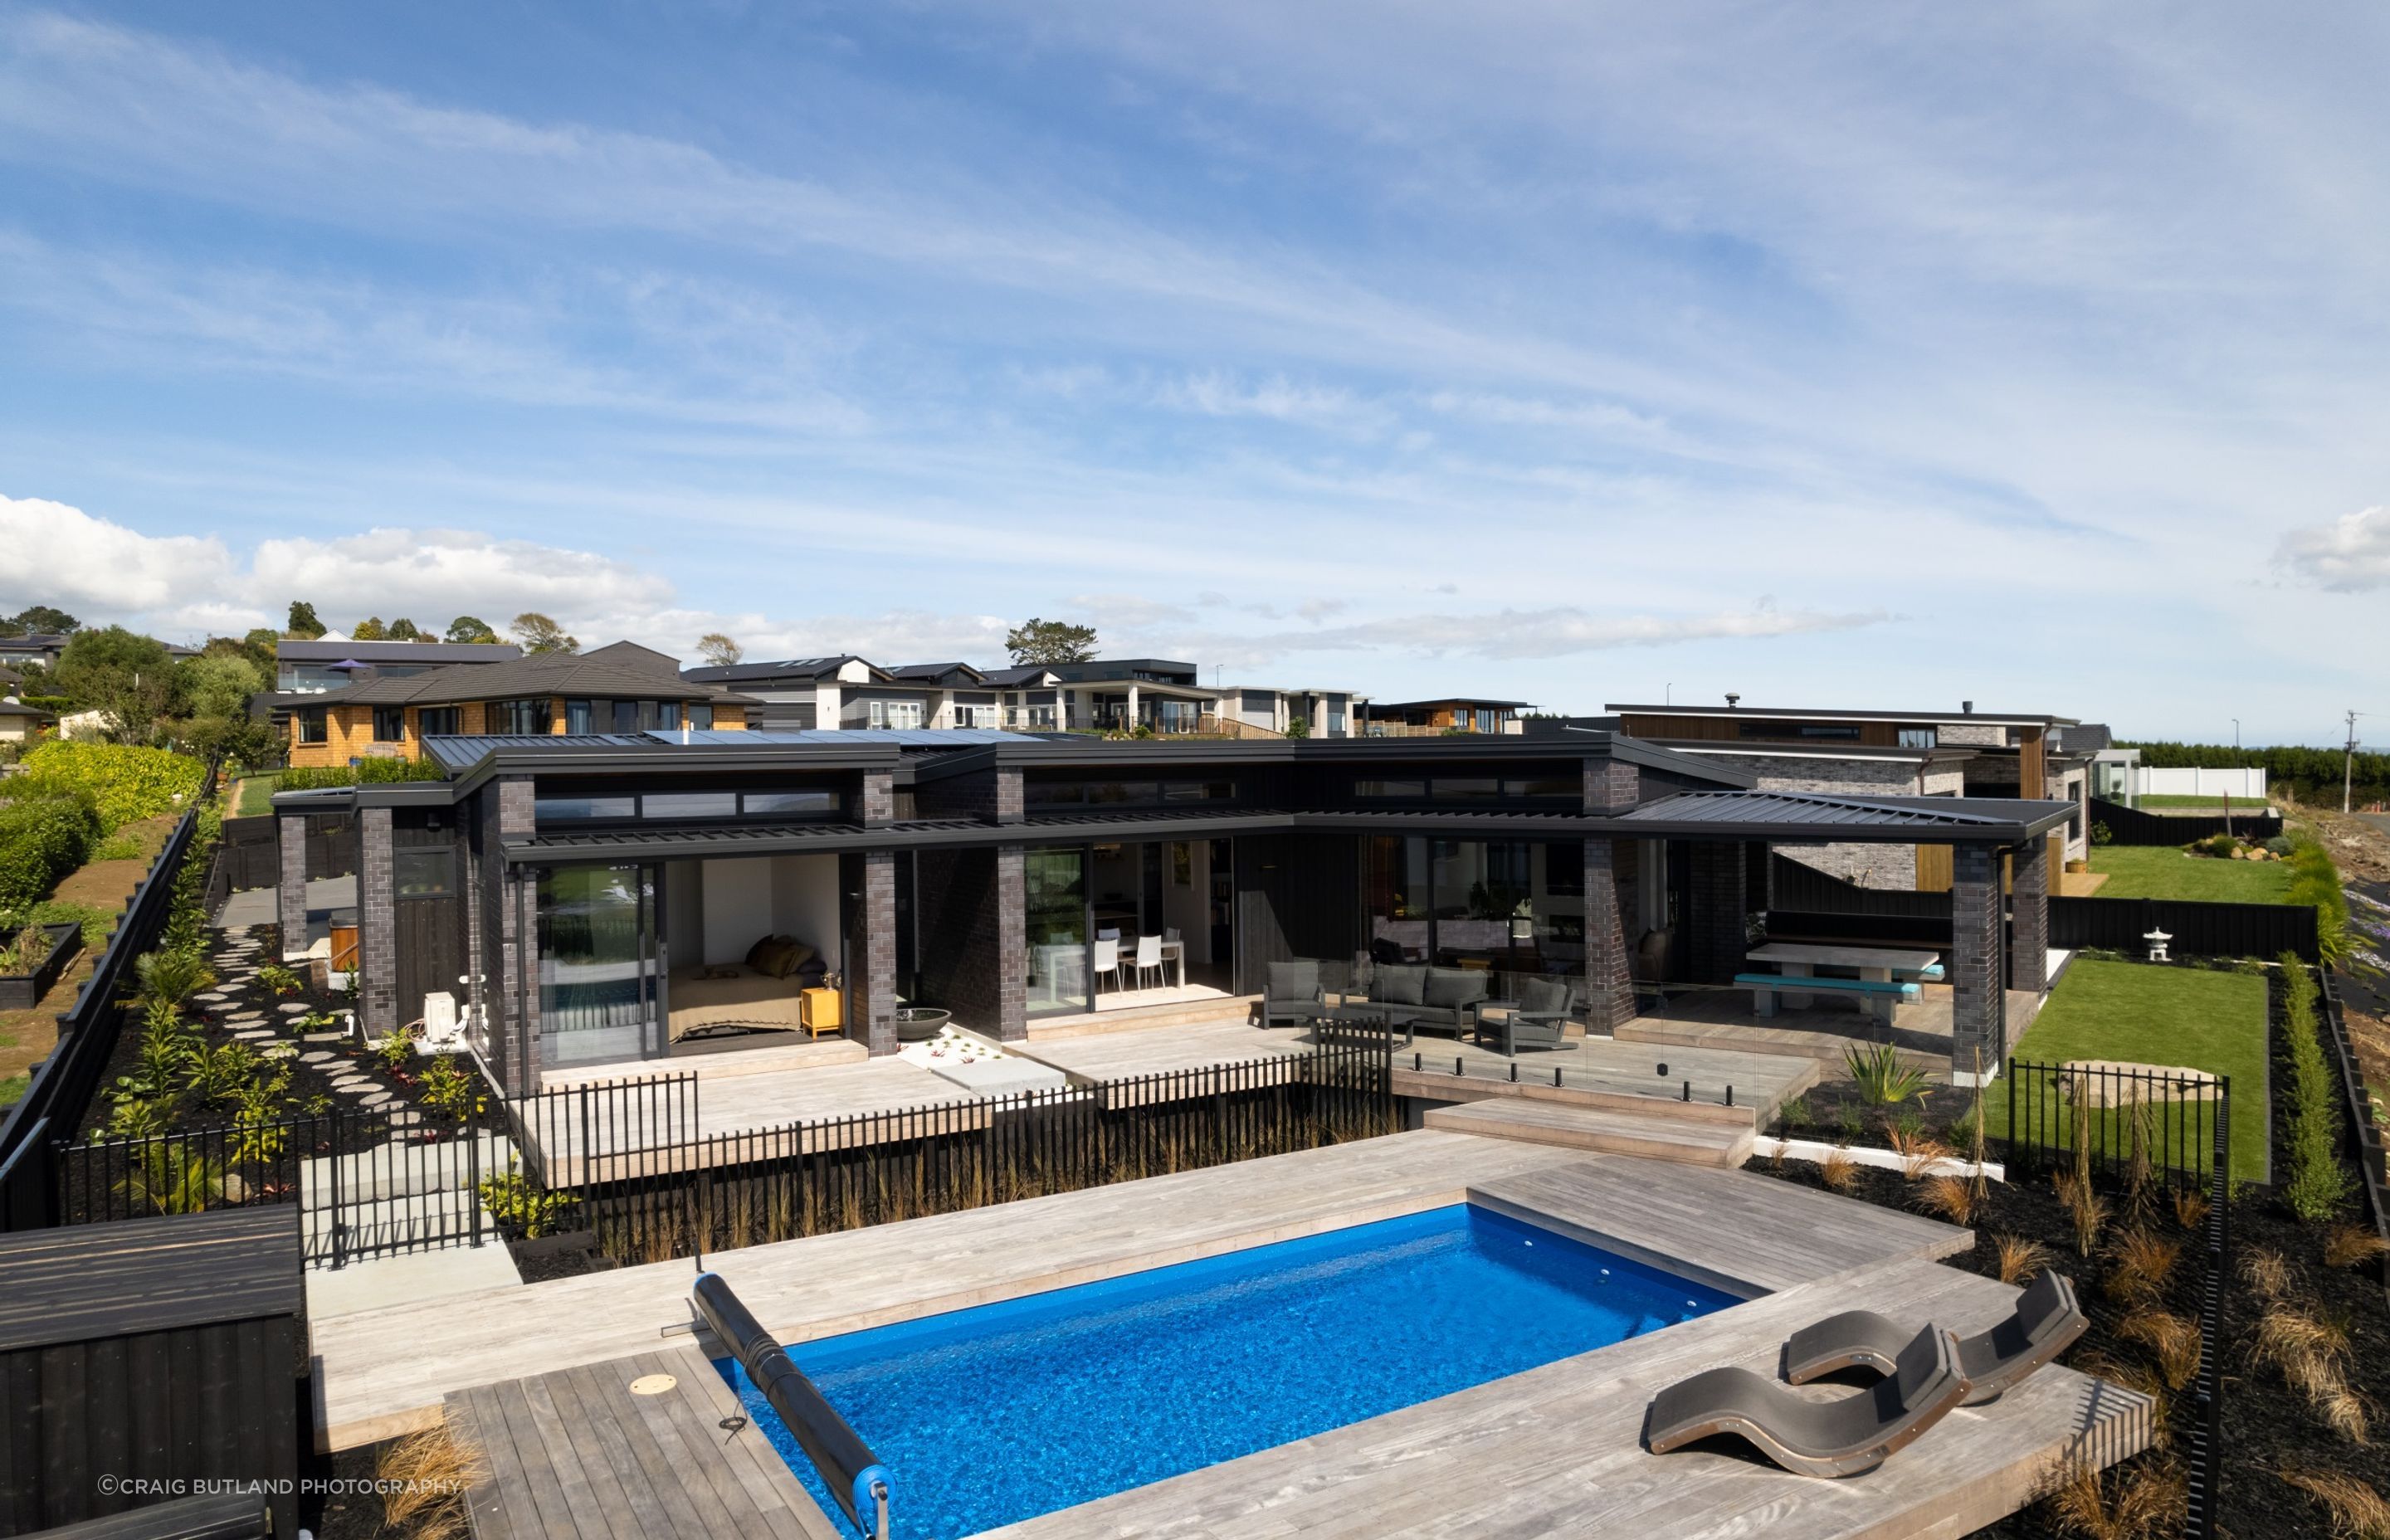 Depth and dynamism with this multi-level deck in Pukekohe. | Photography: Craig Butland Photography